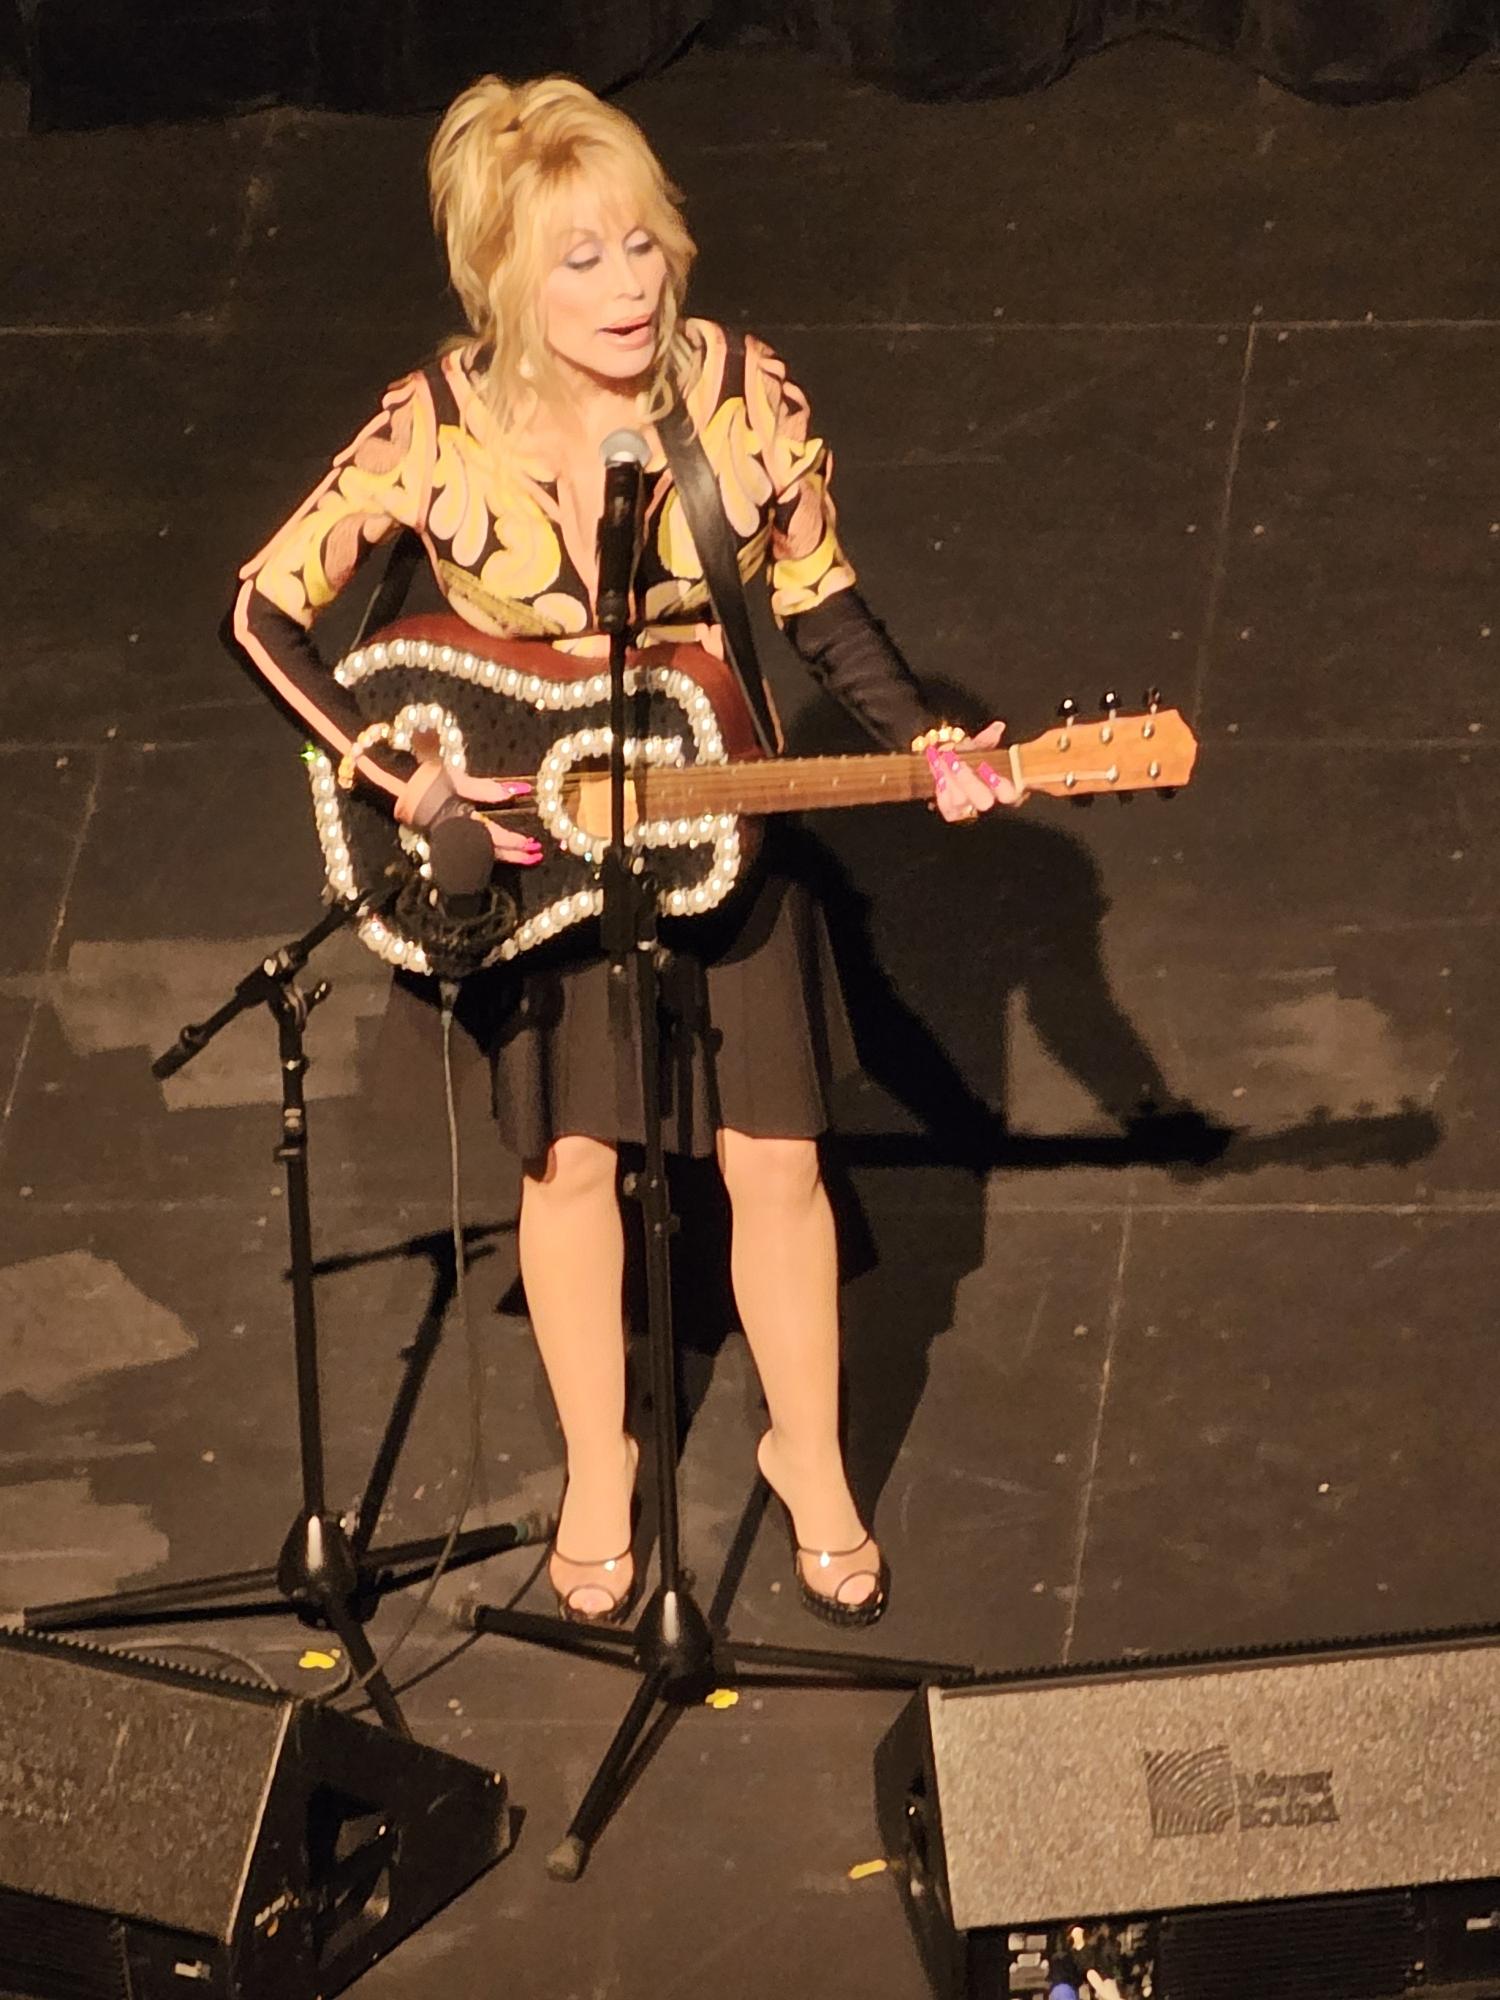 Parton performed two songs for the audience, "Coat of Many Colors" and "Try," which was written as the theme for the Imagination Library. // CREDIT: Lauren Gallup, NWPB